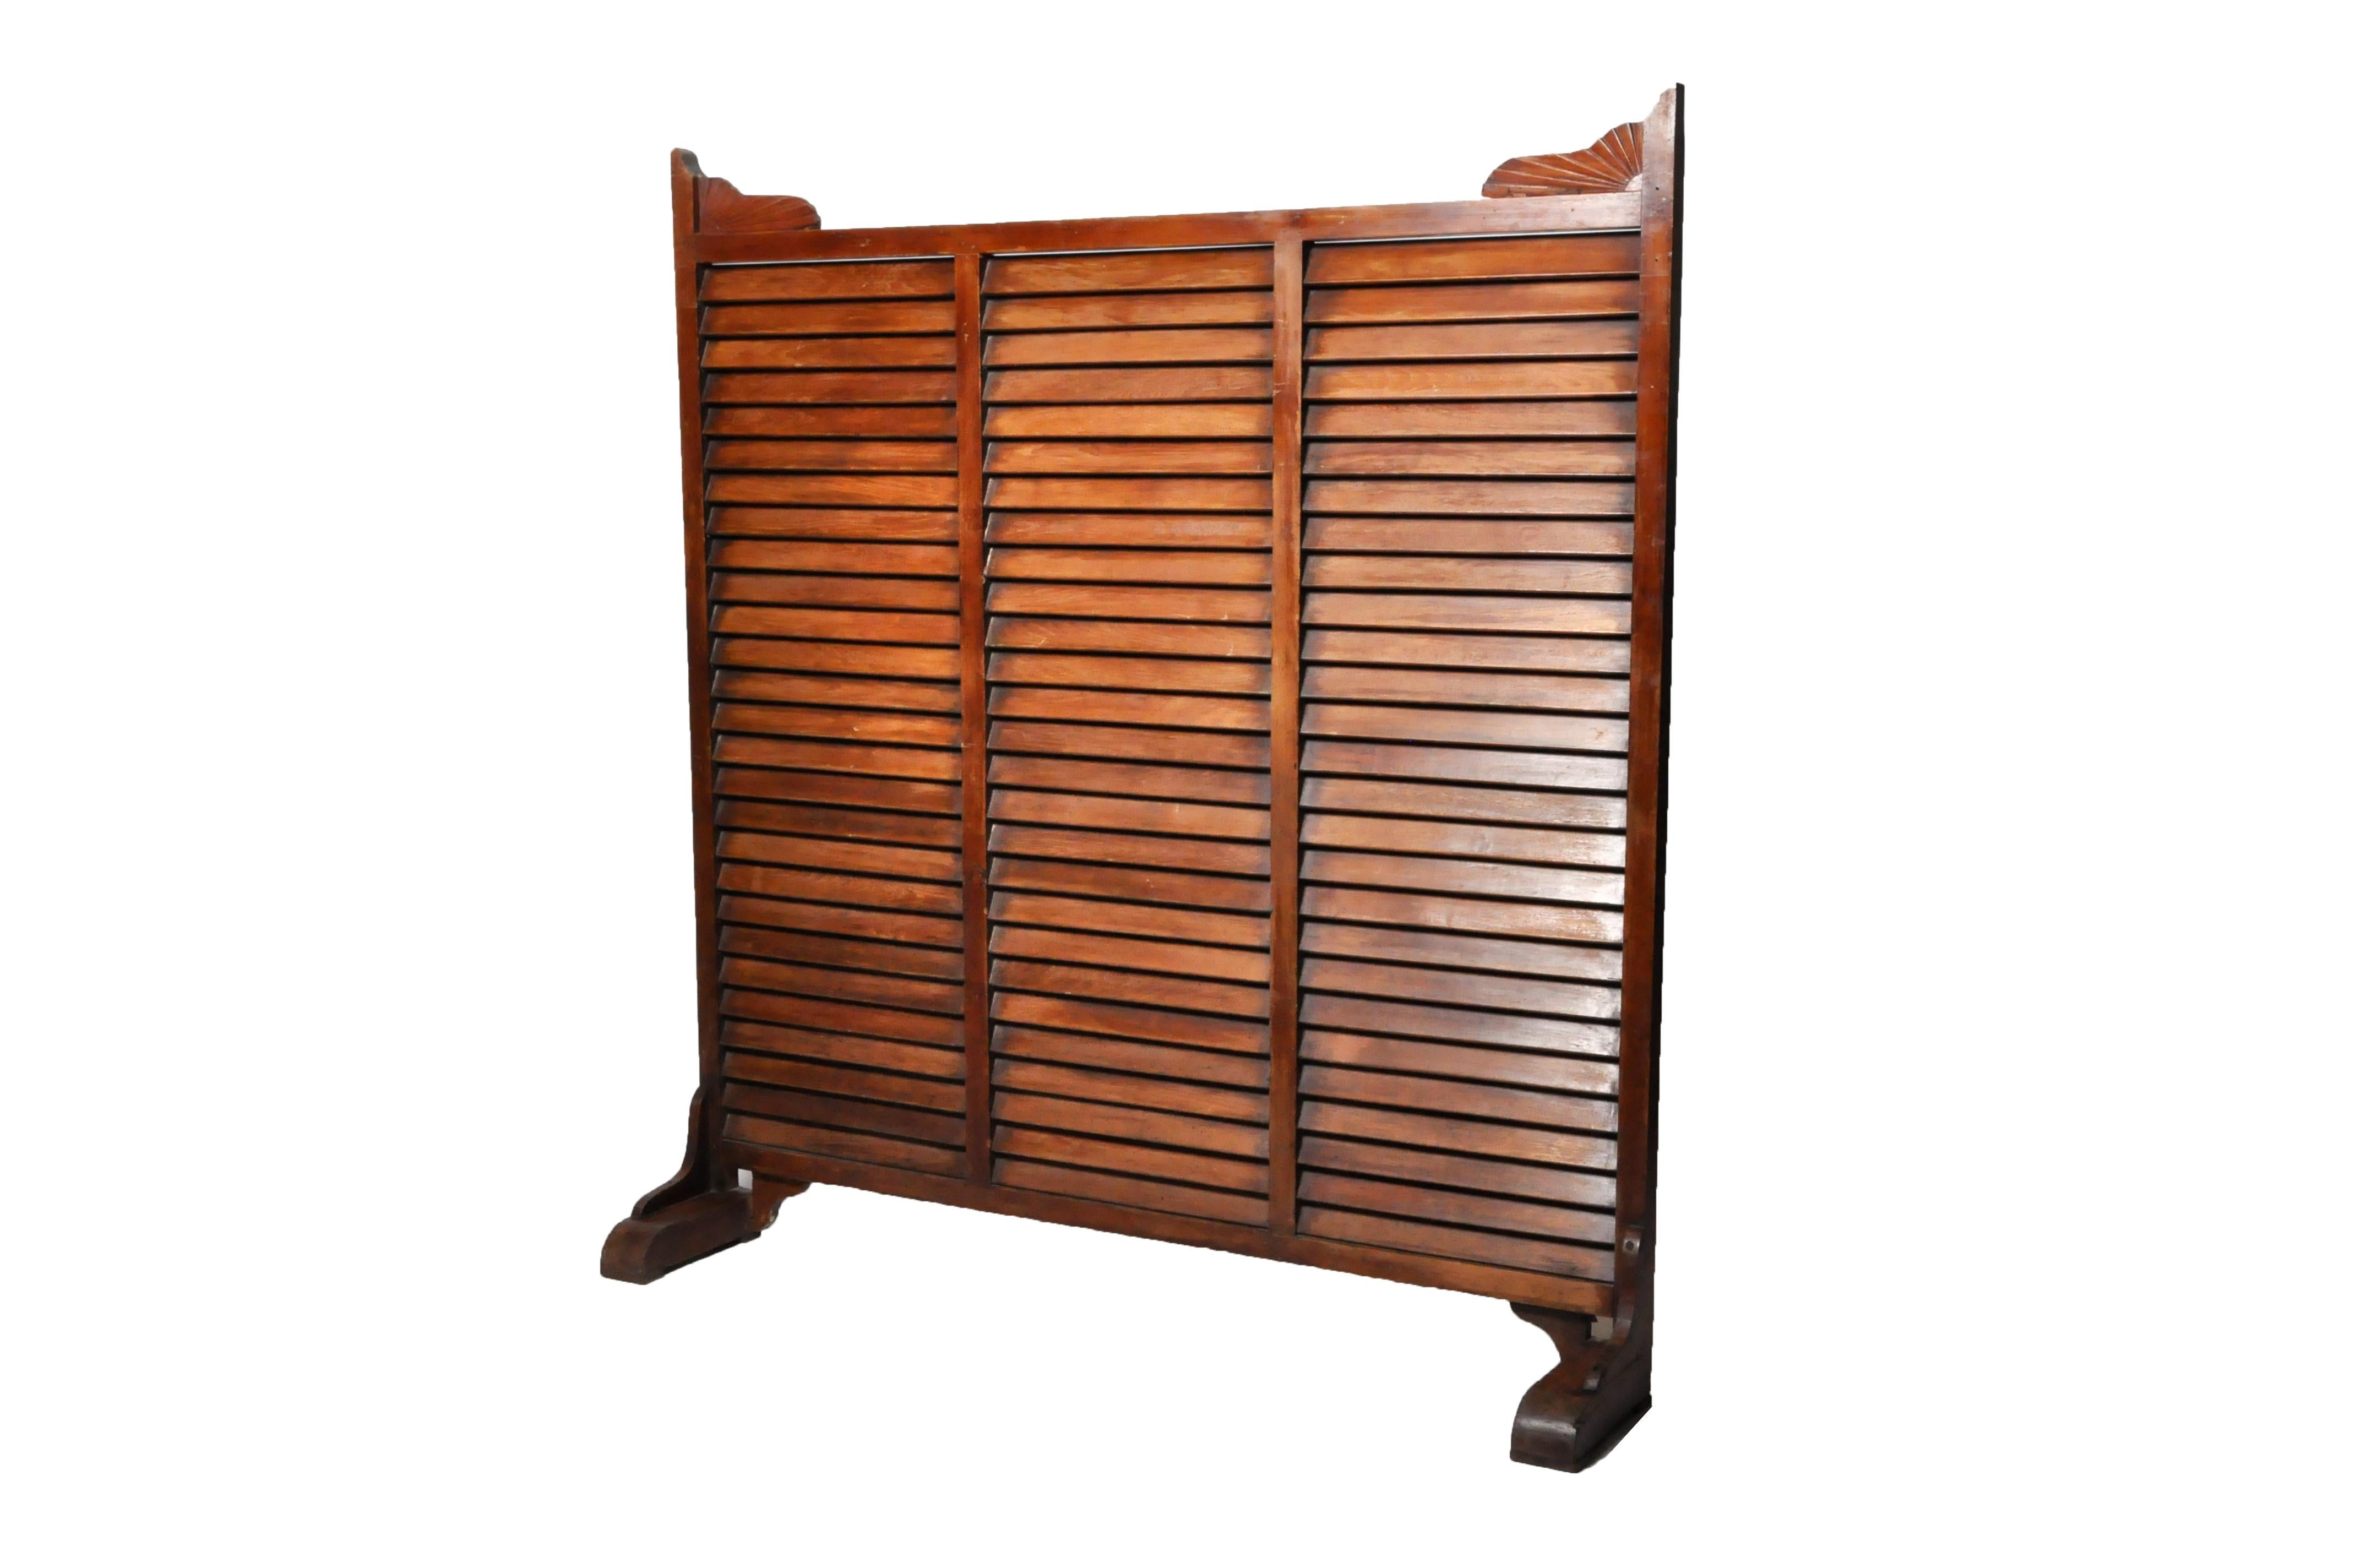 This free-standing louver wall once divided space in a colonial home or office. The piece is from Rangoon, Burma, and dates to the late 19th century. During that time, the British ruled Burma and greatly expanded the trading cities of Mandalay and